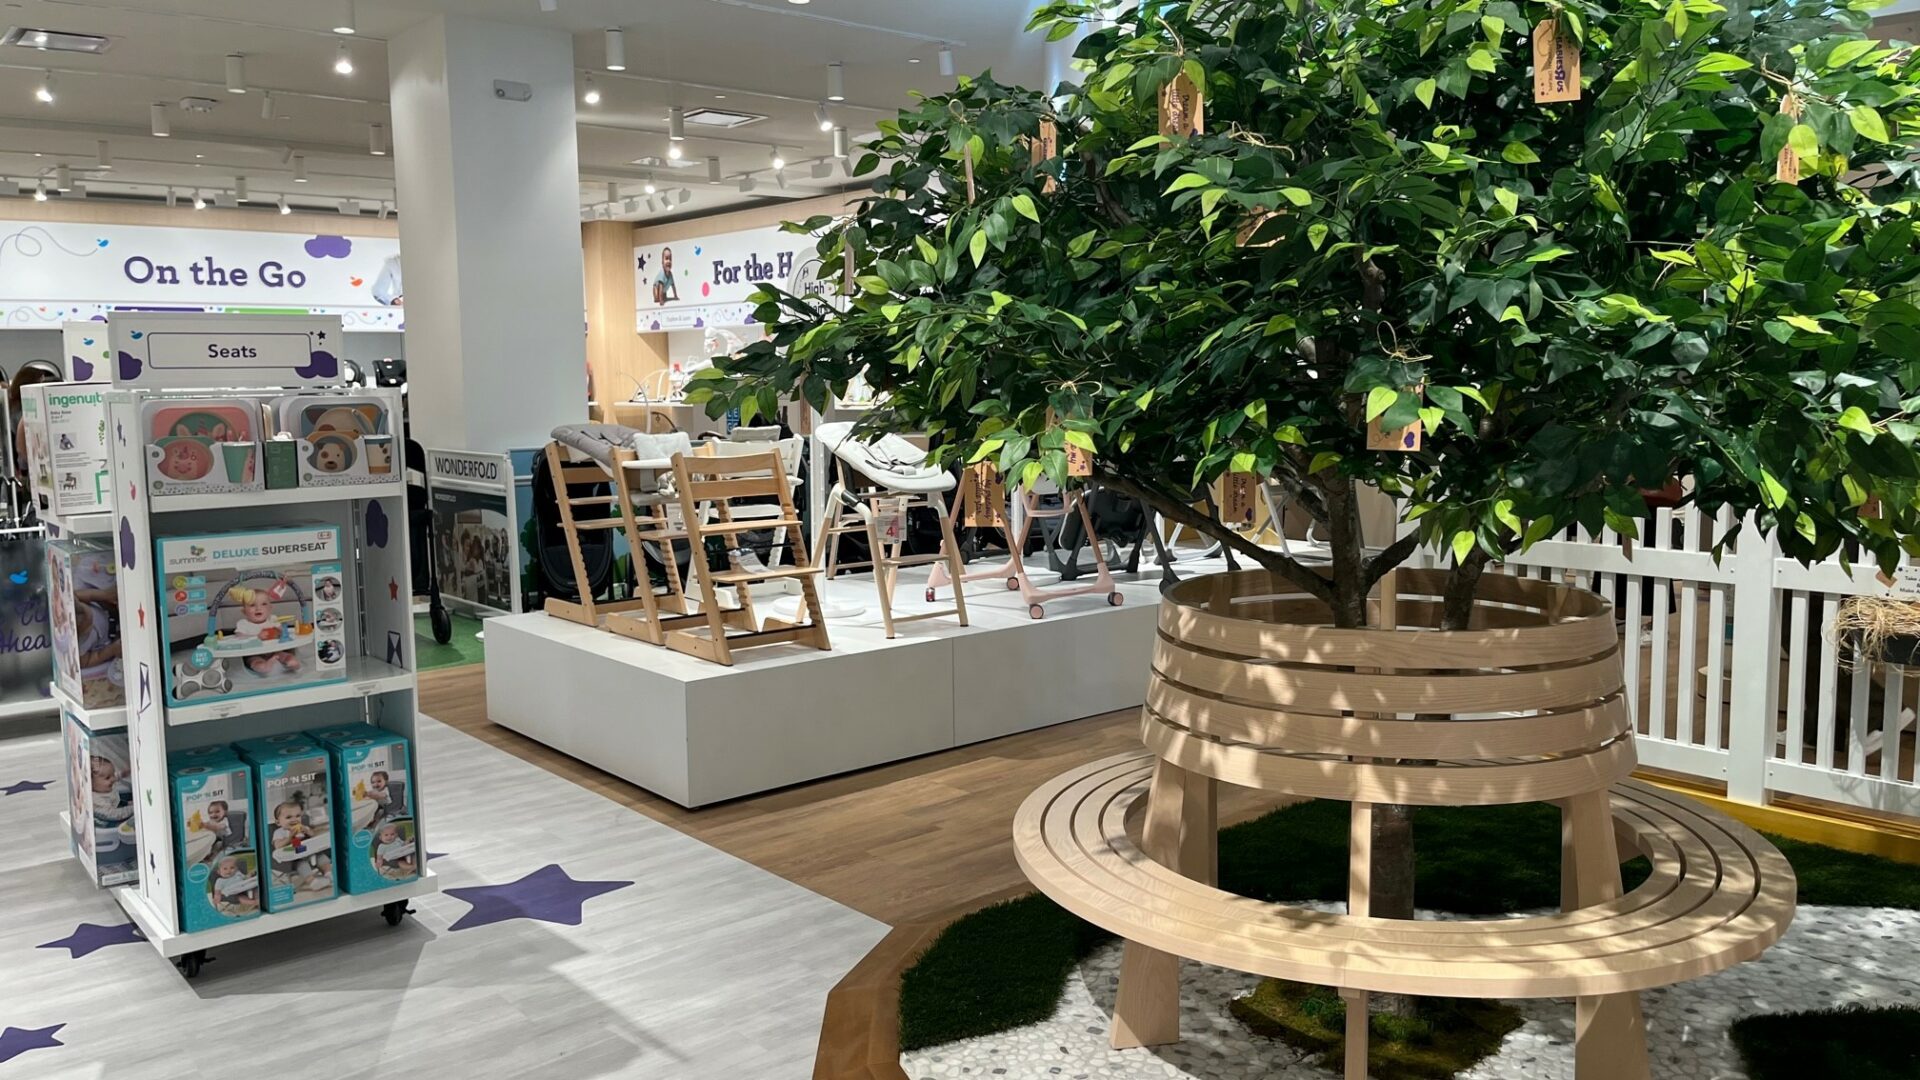 The Wishing Tree. (Photo Credit: Retail TouchPoints)